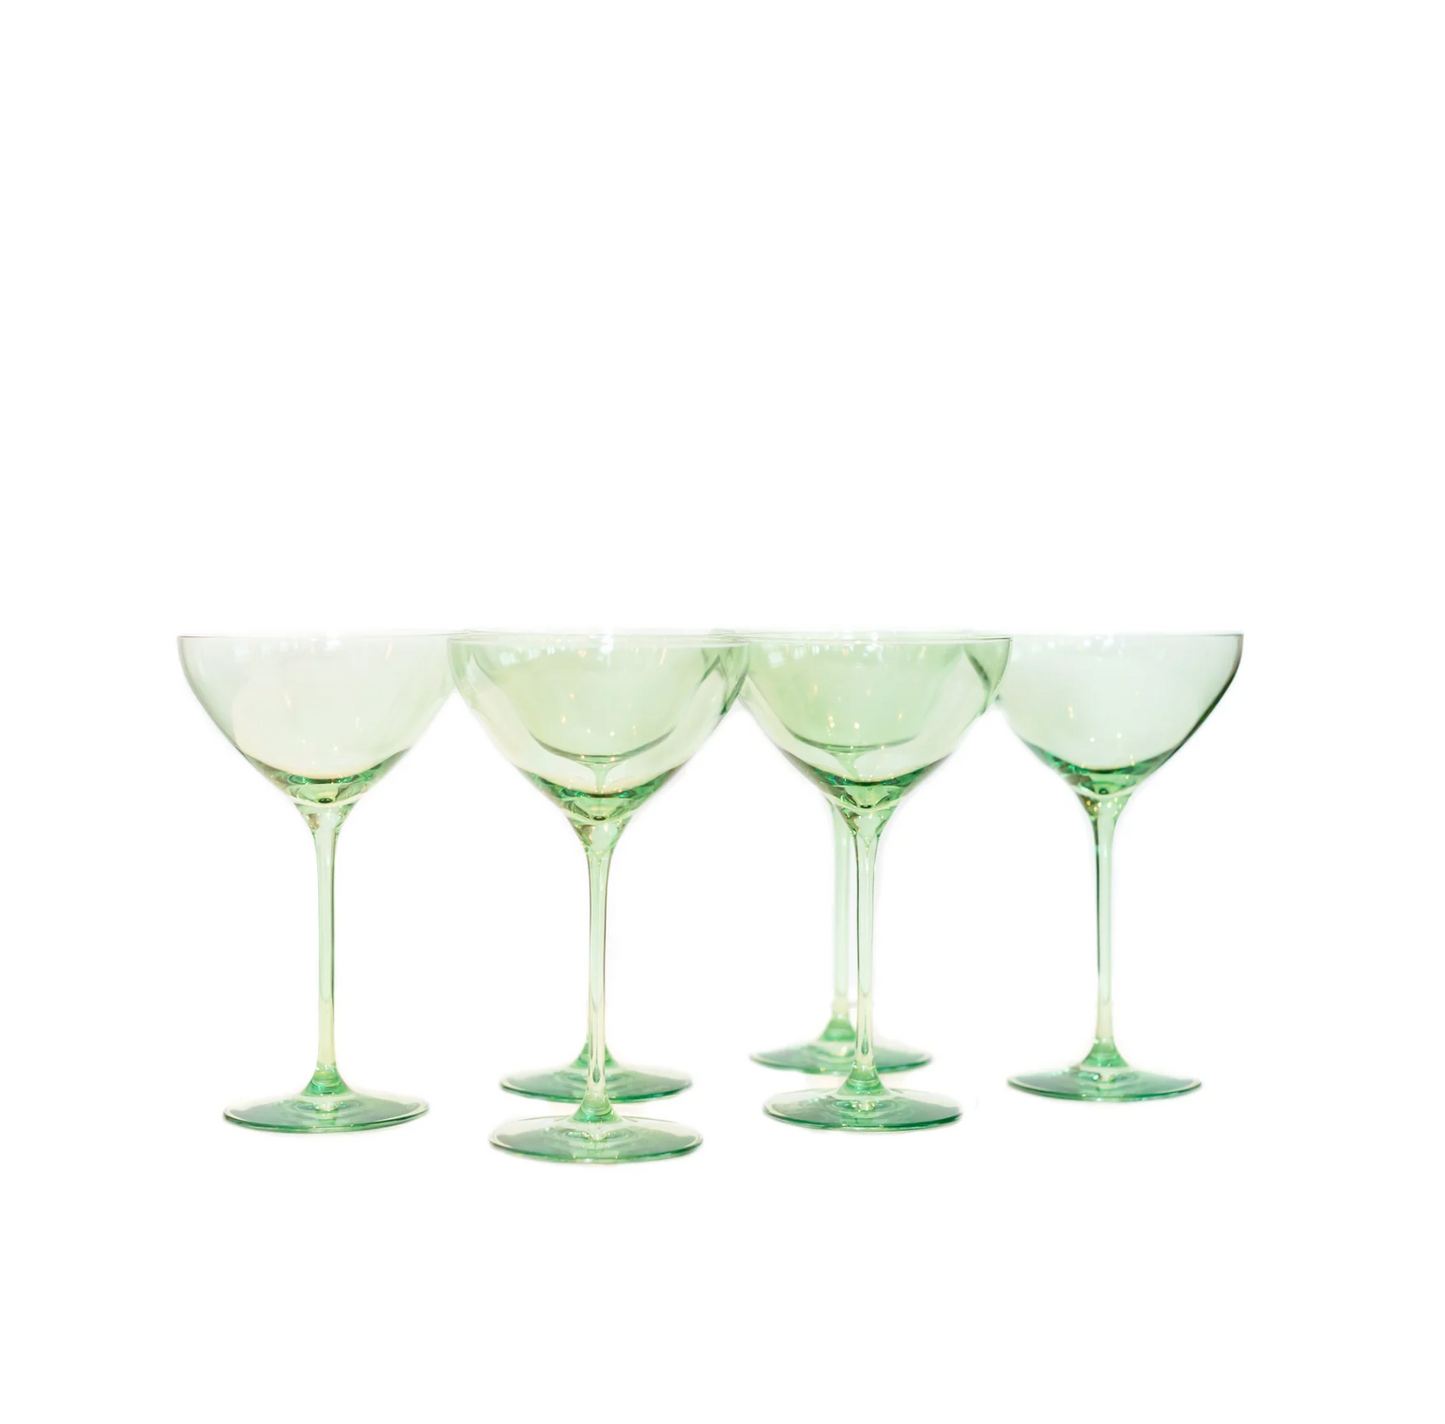 Colored Martini Glass - Mint Green - Estelle Colored Glass (Set of 6)